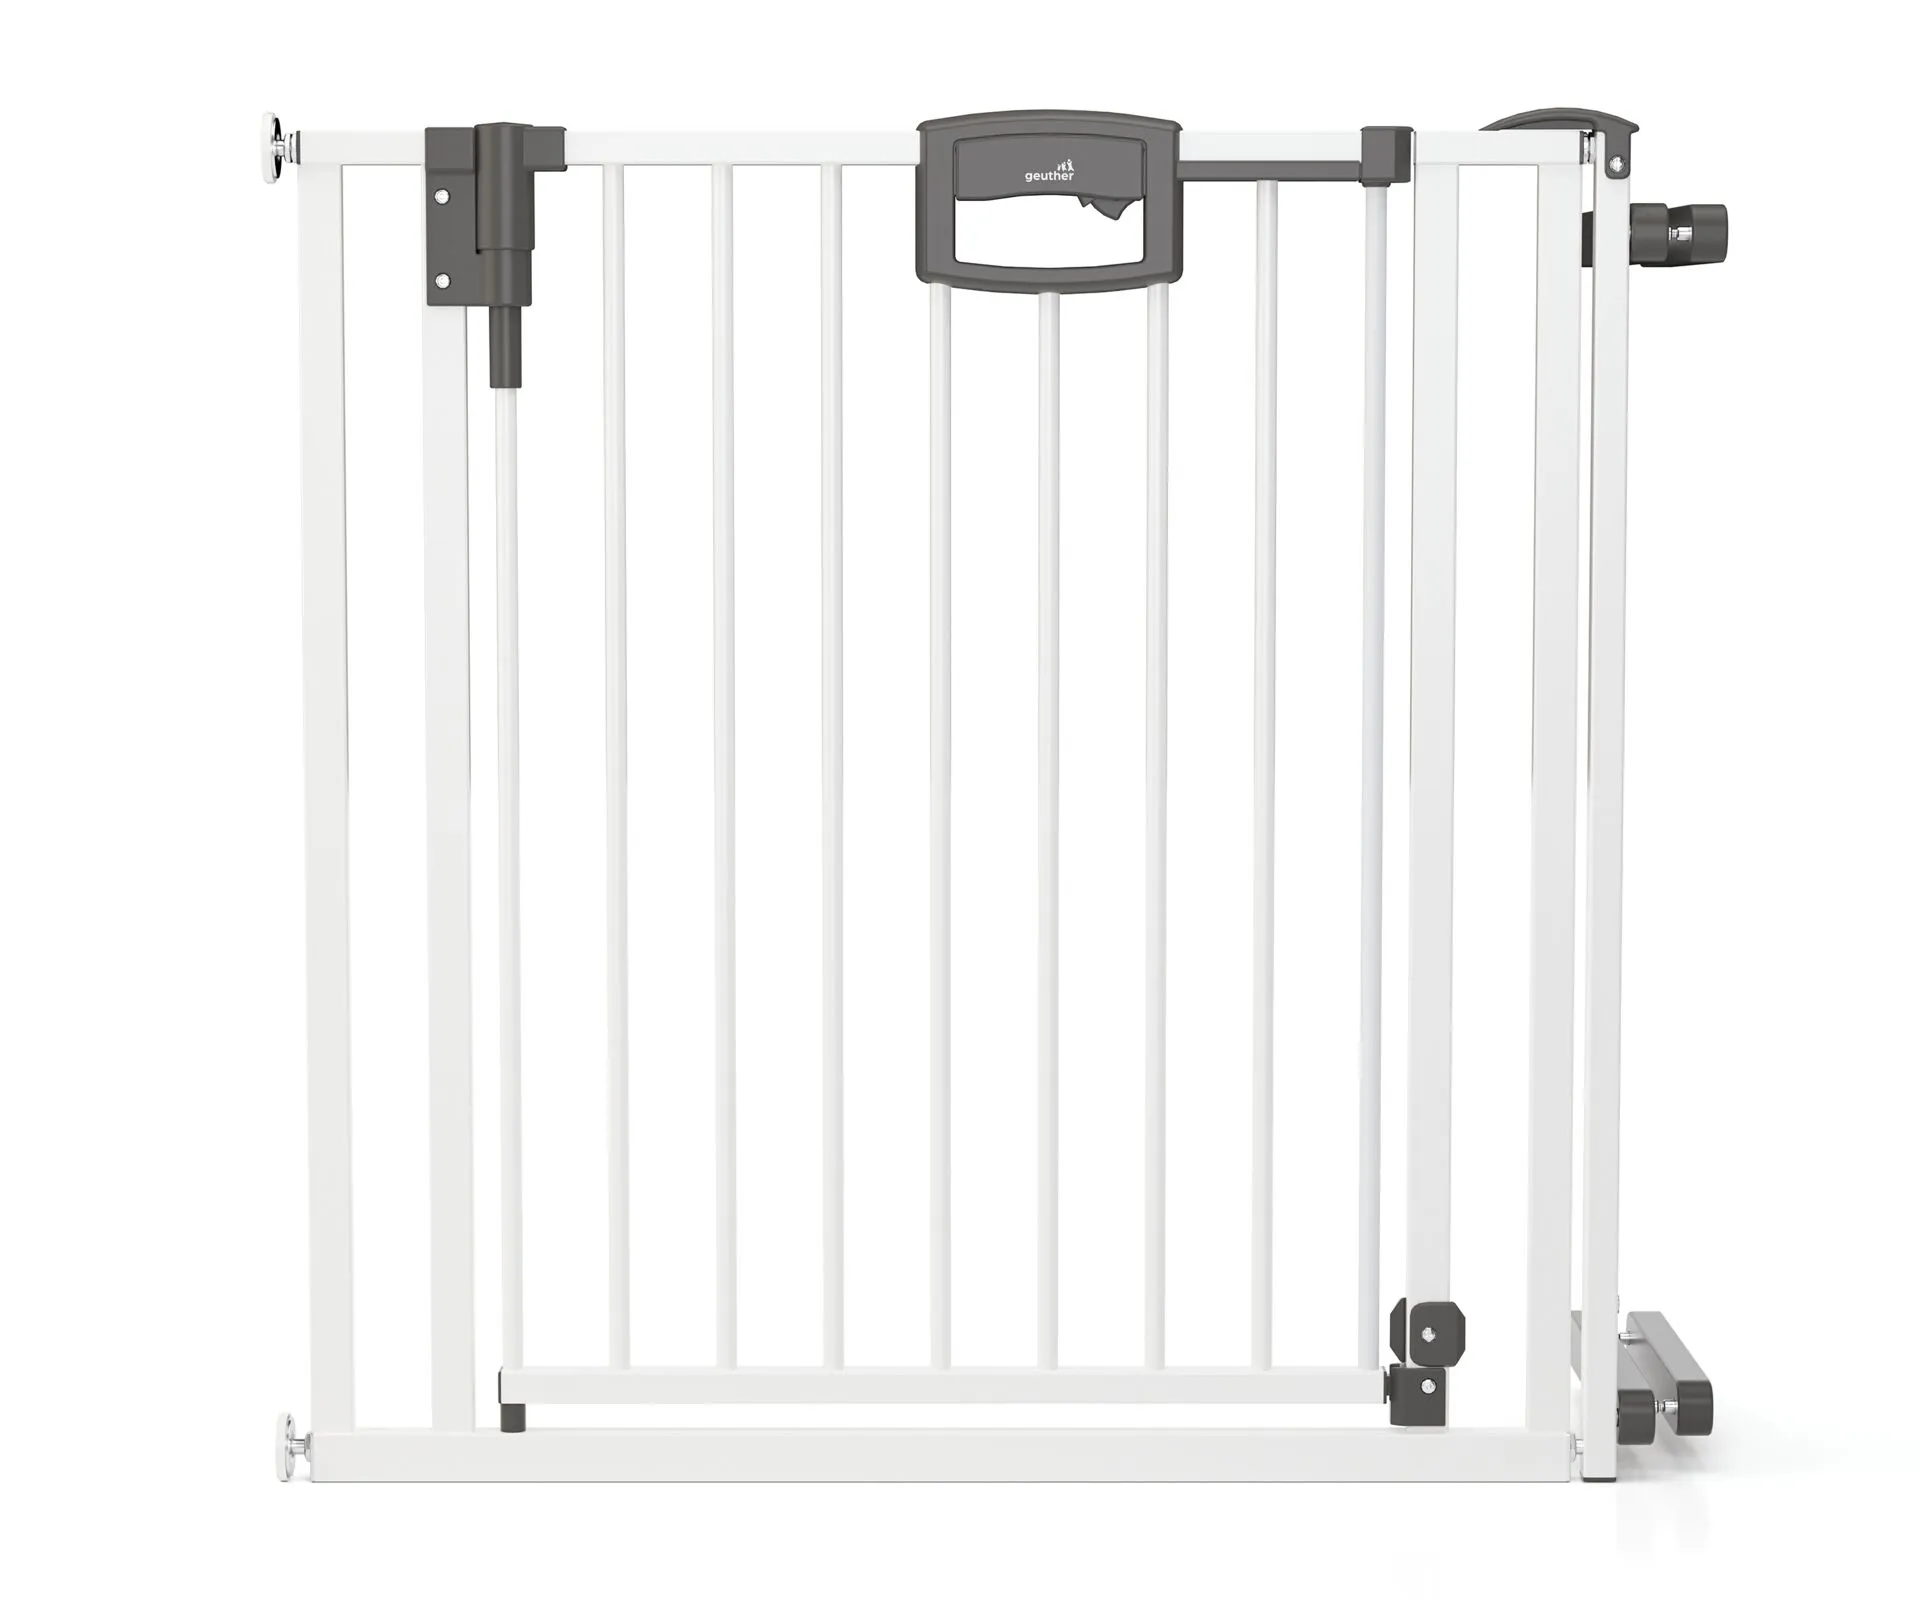 Metal Easylock Plus door protection gate and stair gate for clamping 